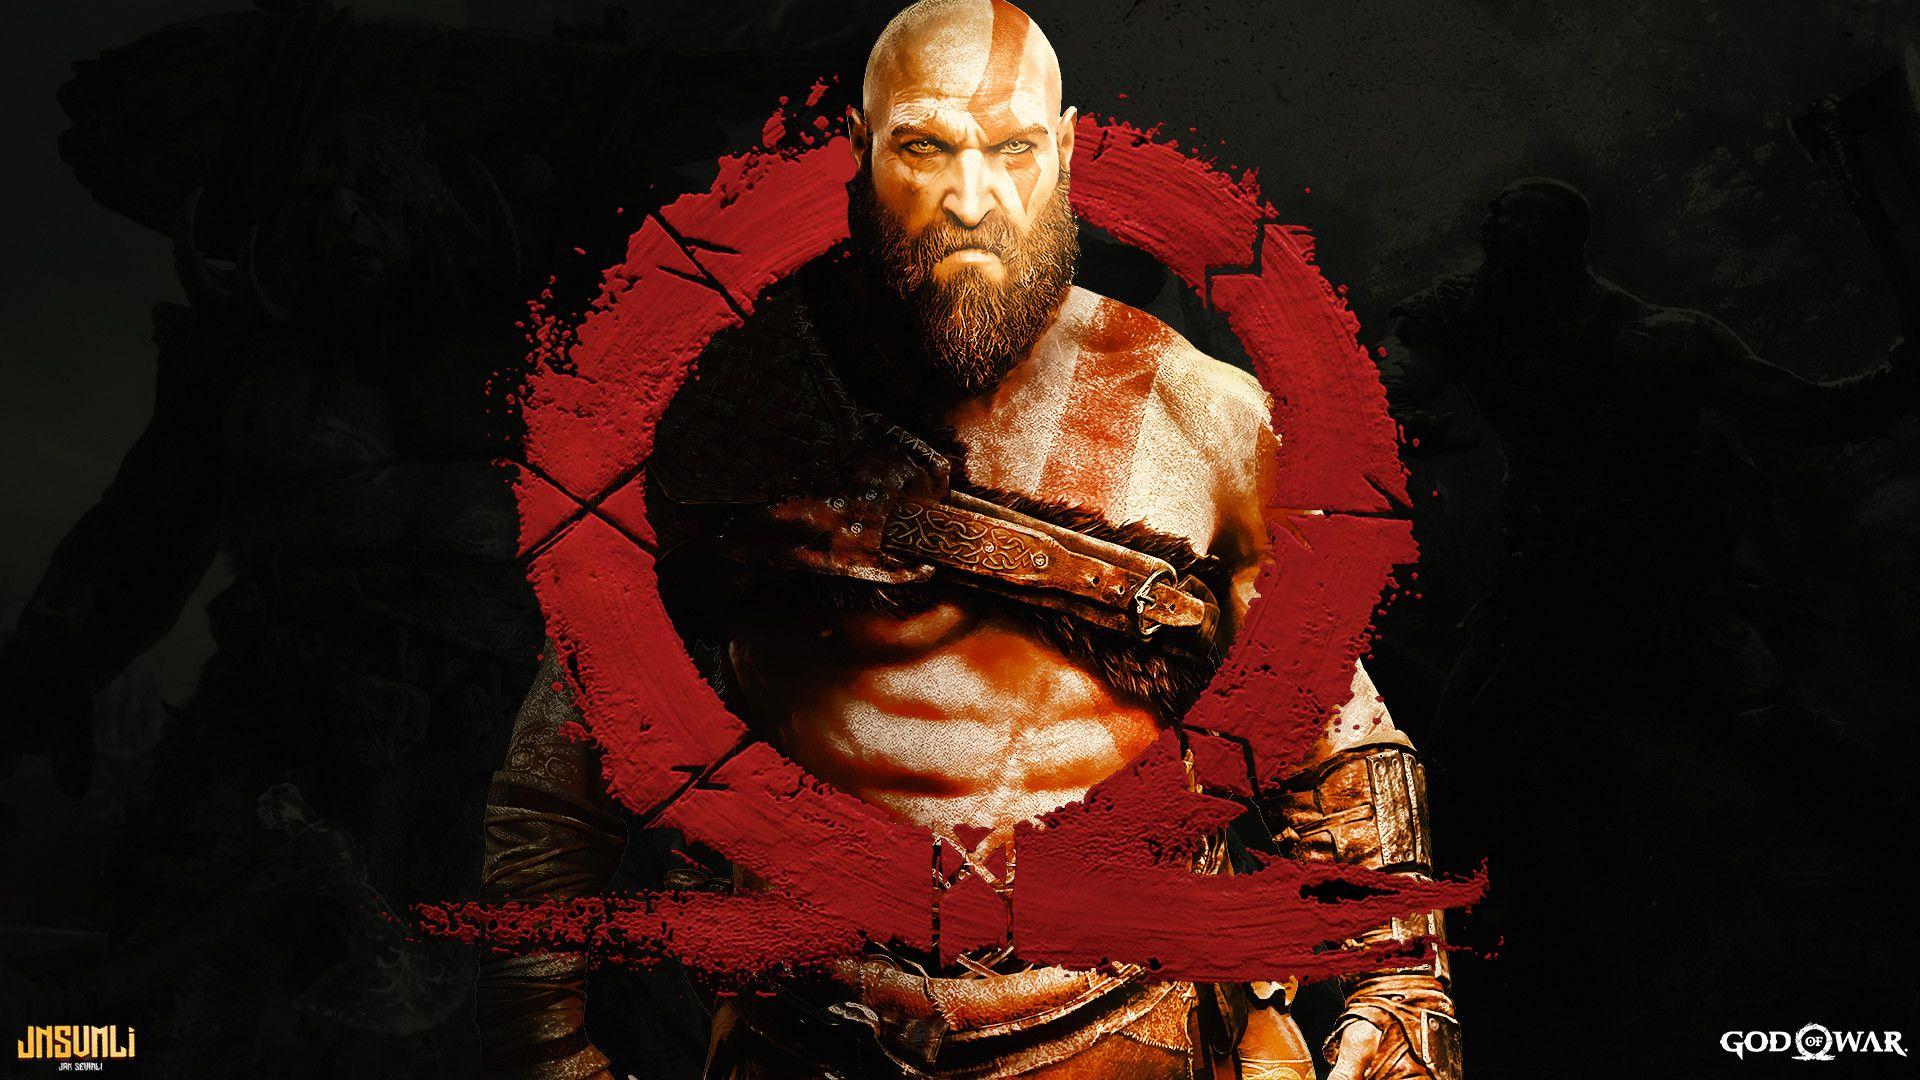 god of war 4 full game free download for pc